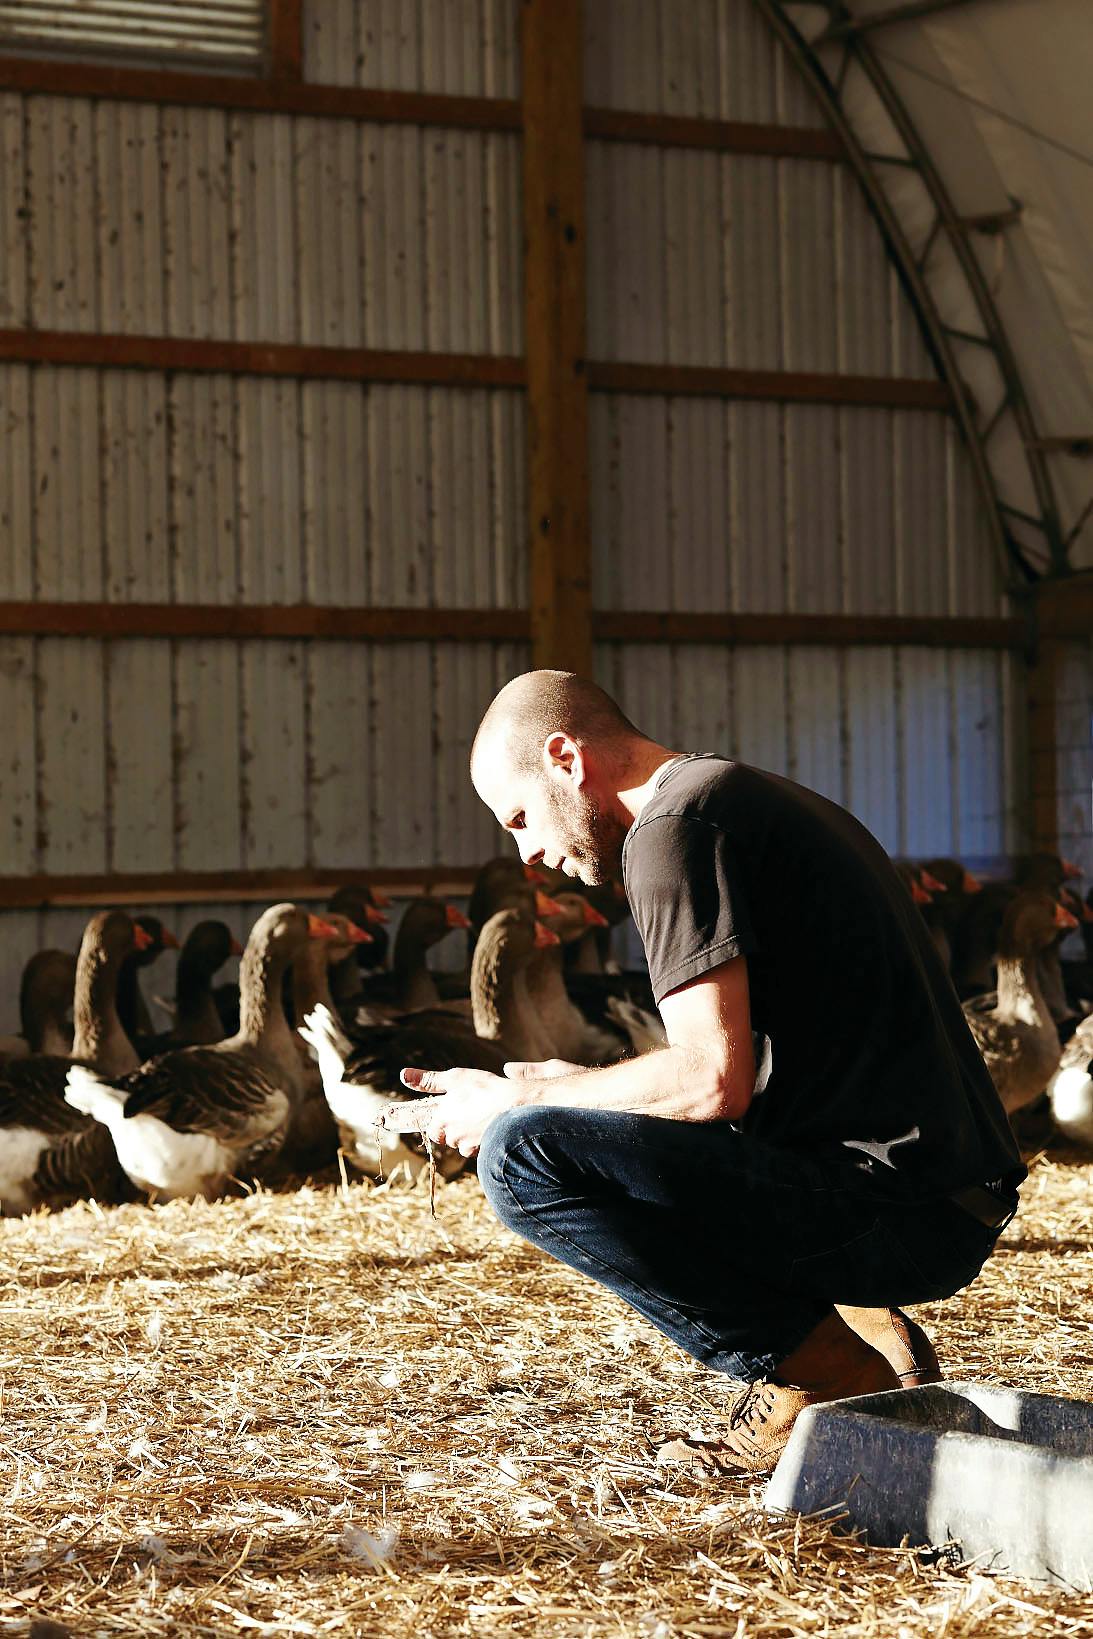 Sunlit man crouching in a barn with geese